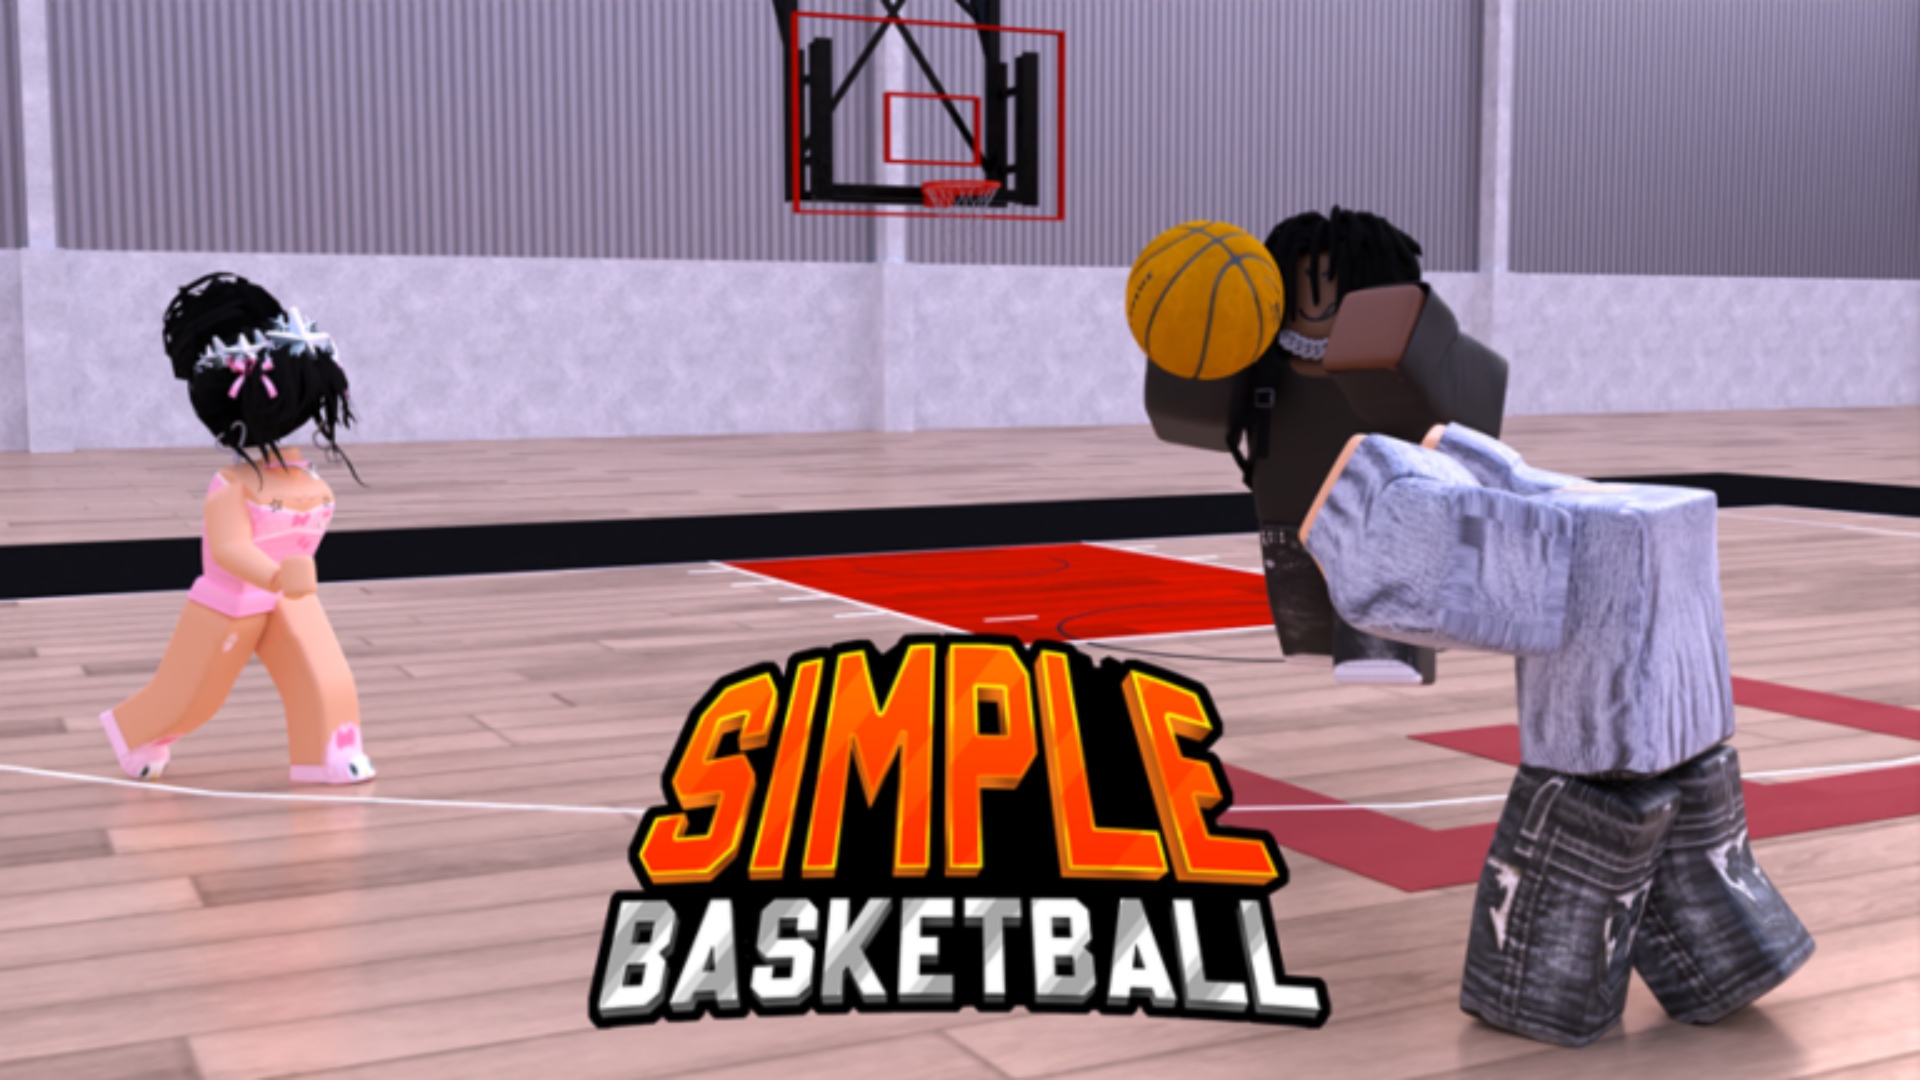 All Simple Basketball codes for free coins